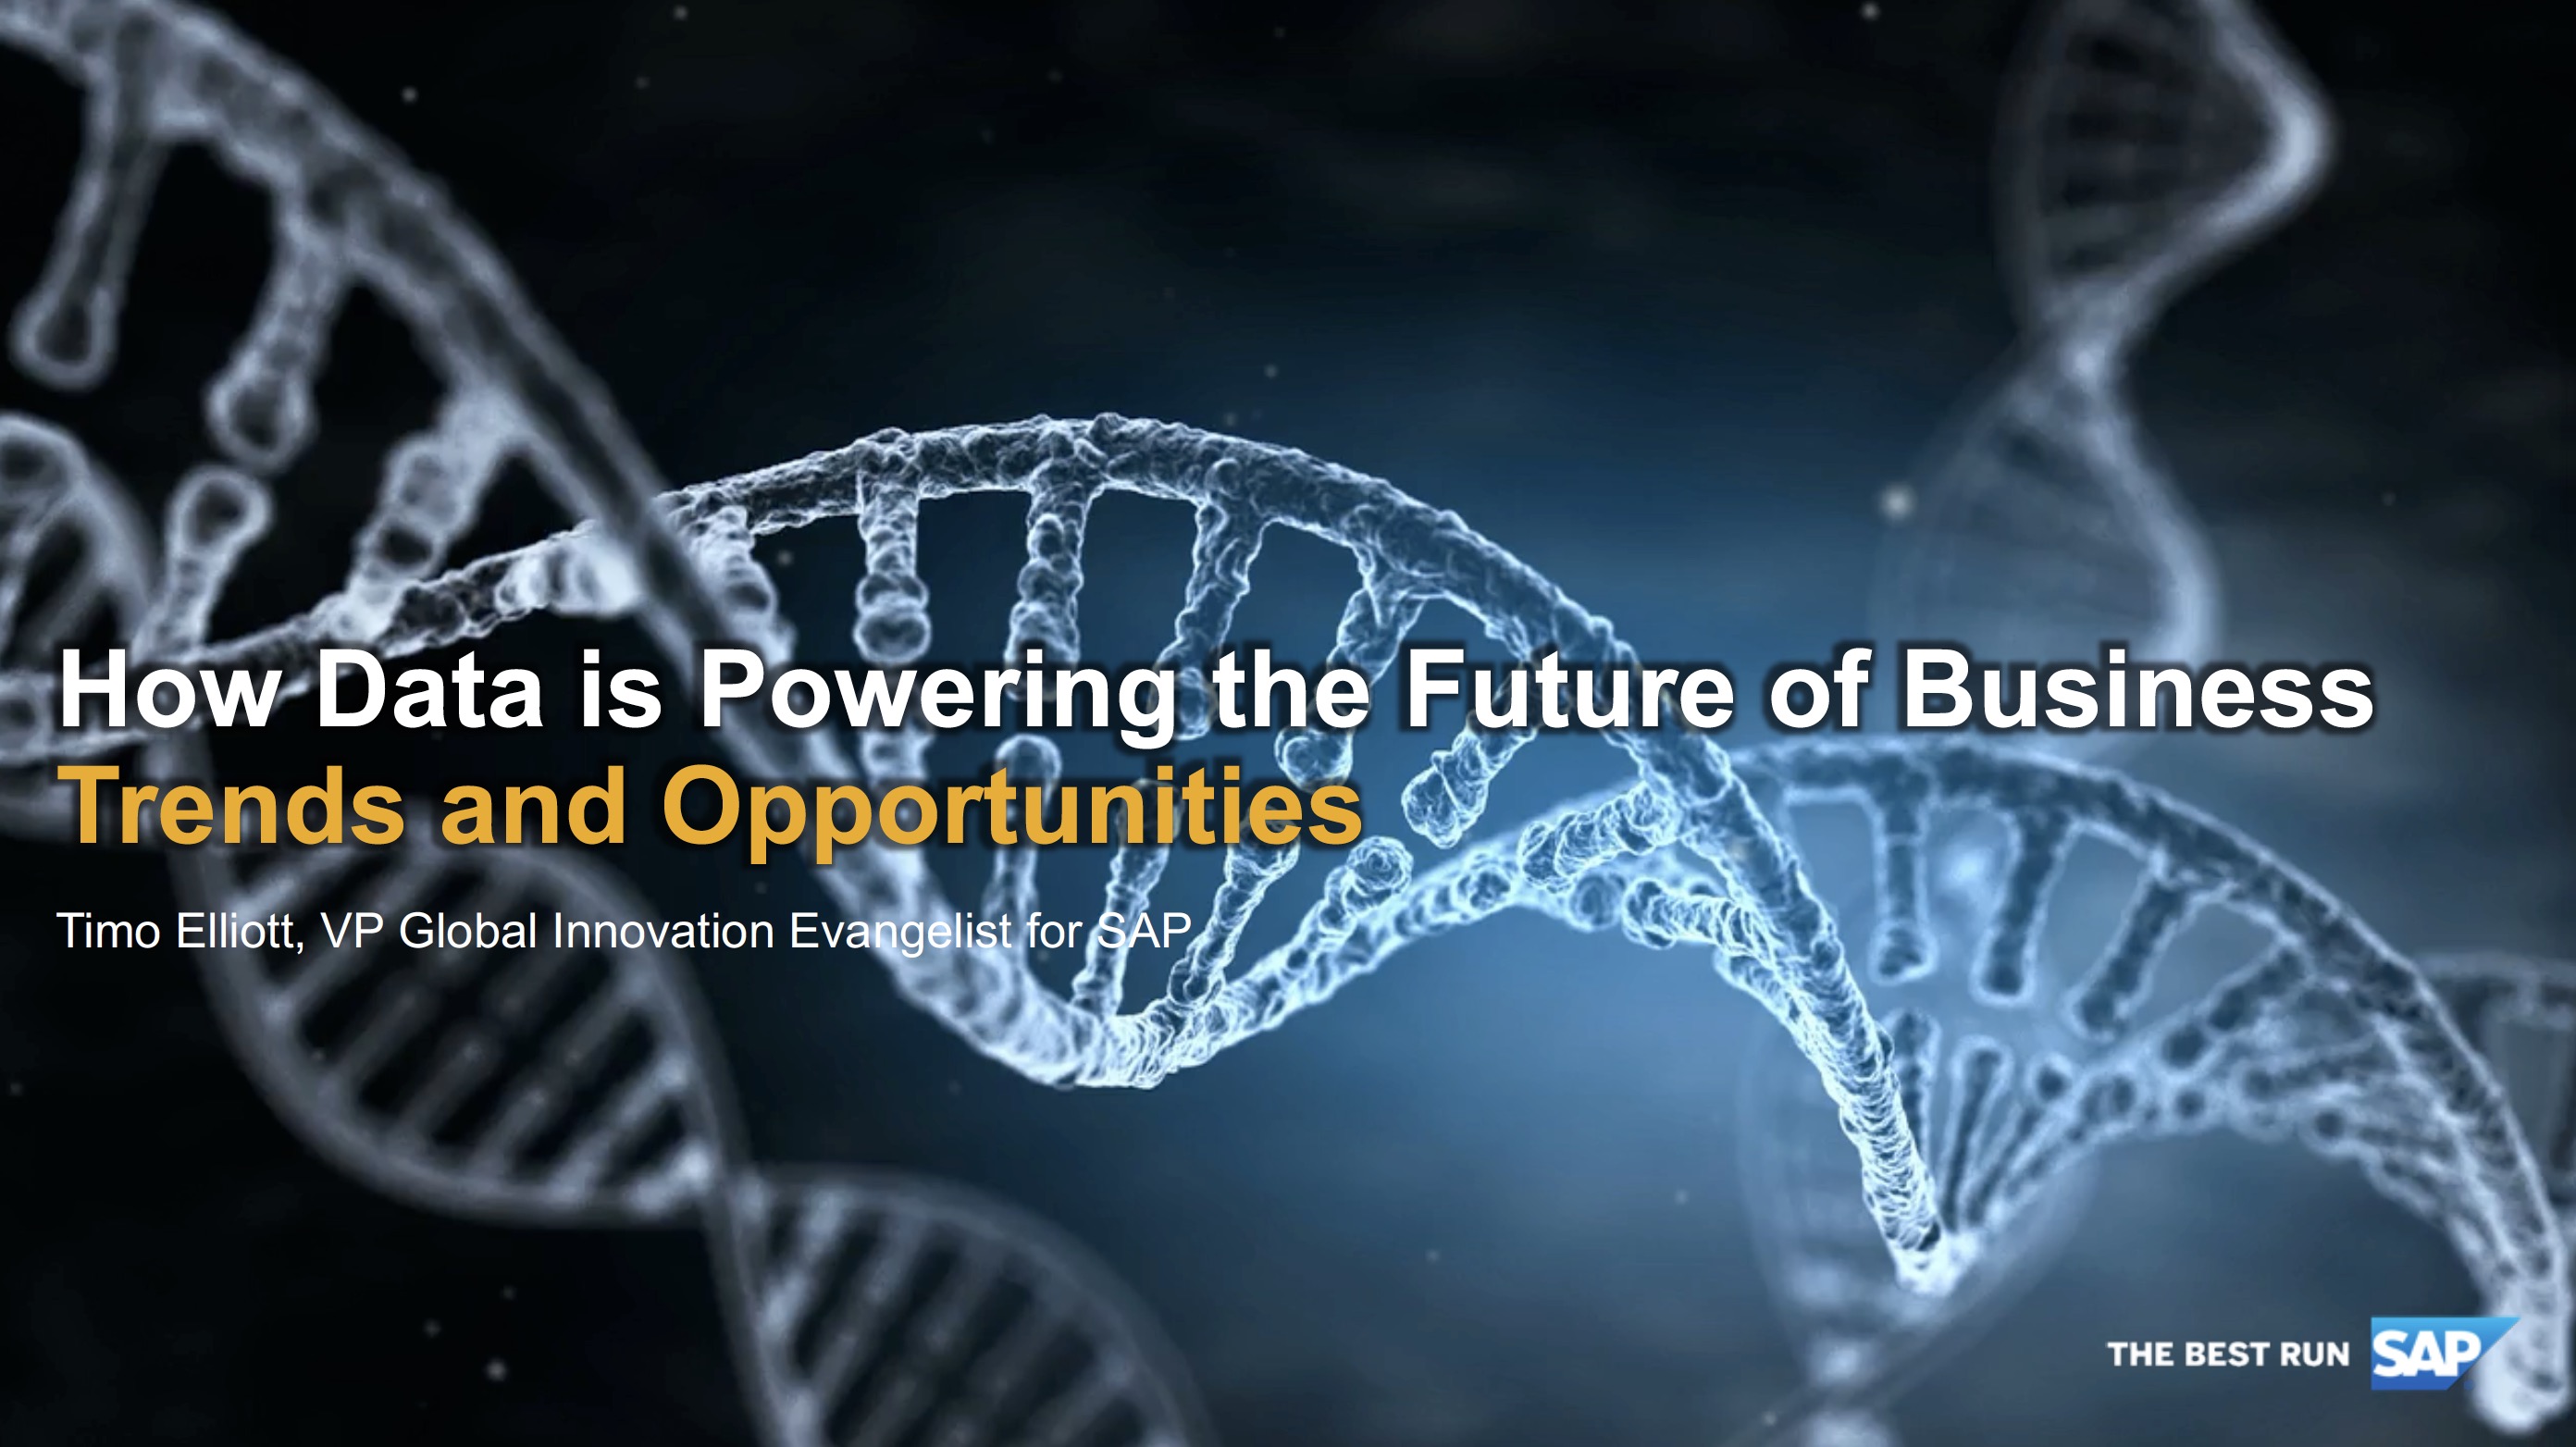 How Data is Powering The Future of Business: Trends and Opportunities